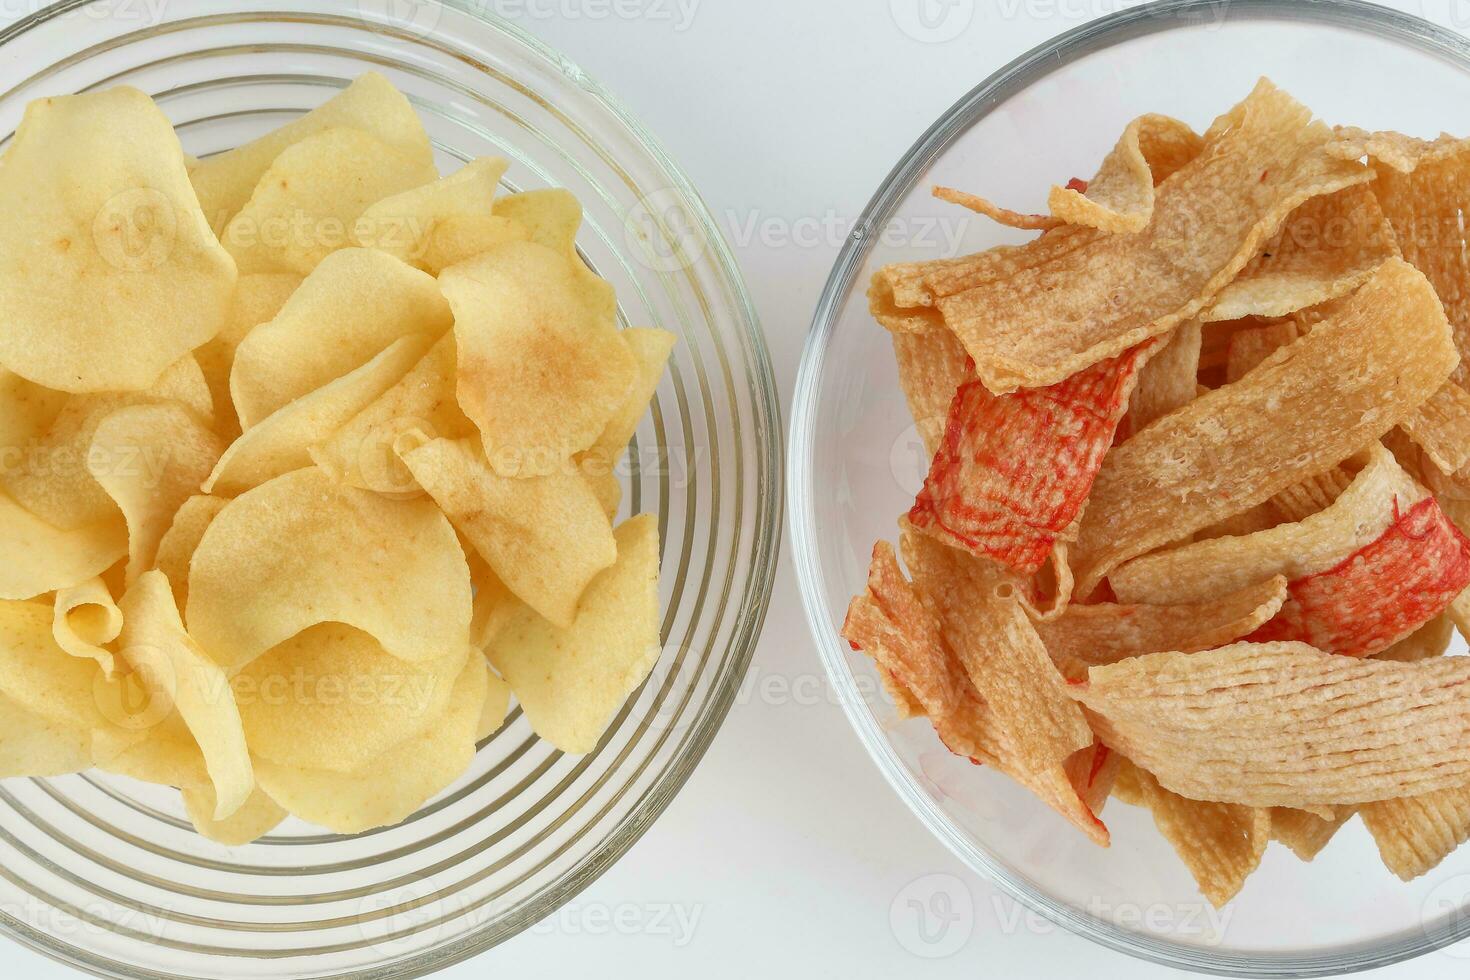 crab chips snack and arrowhead chips traditional for Chinese new year photo